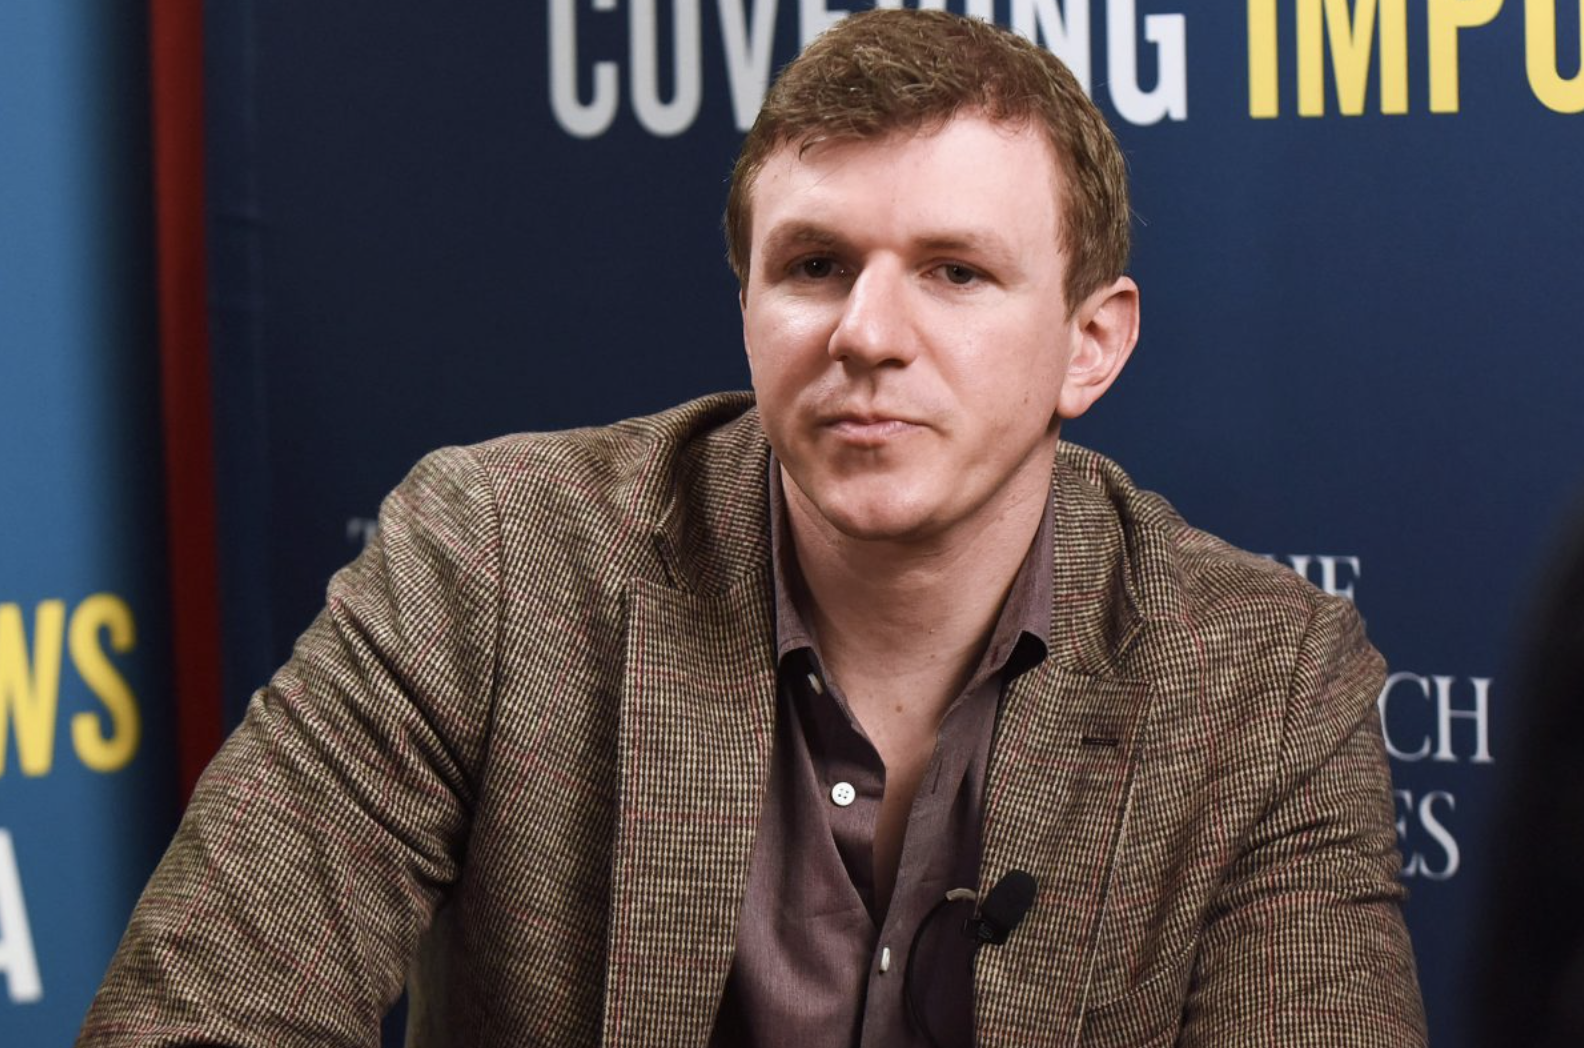 James O’Keefe Issues Statement to Help Him Fight Project Veritas After Group He Founded Threatens to Sue Him to Silence Him